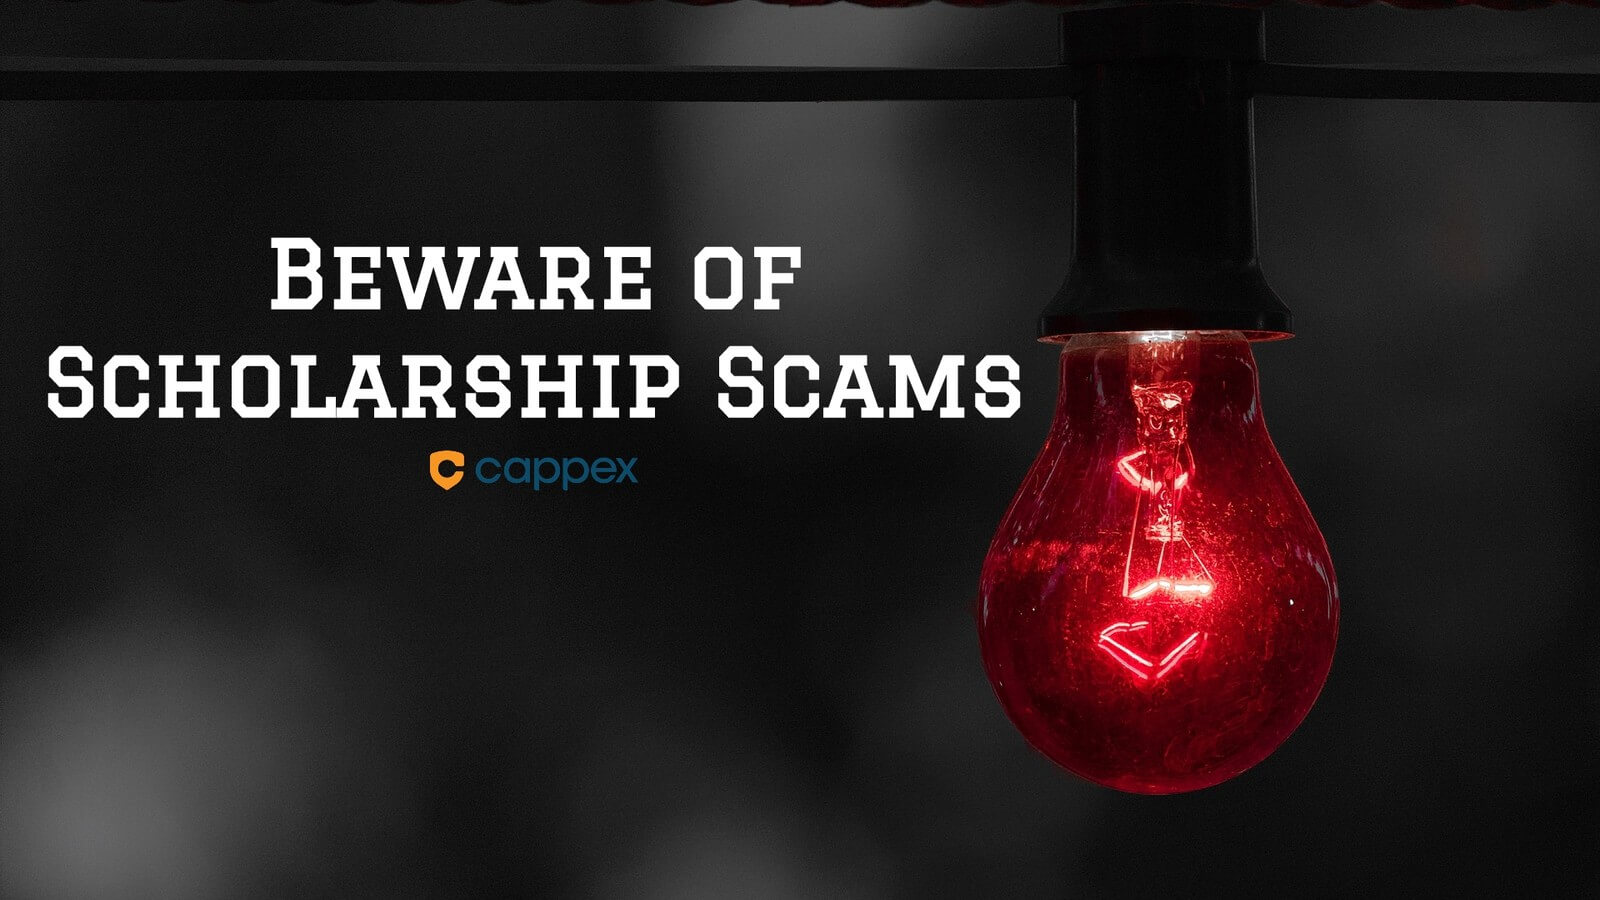 A red warning light with text that says beware of scholarship scams